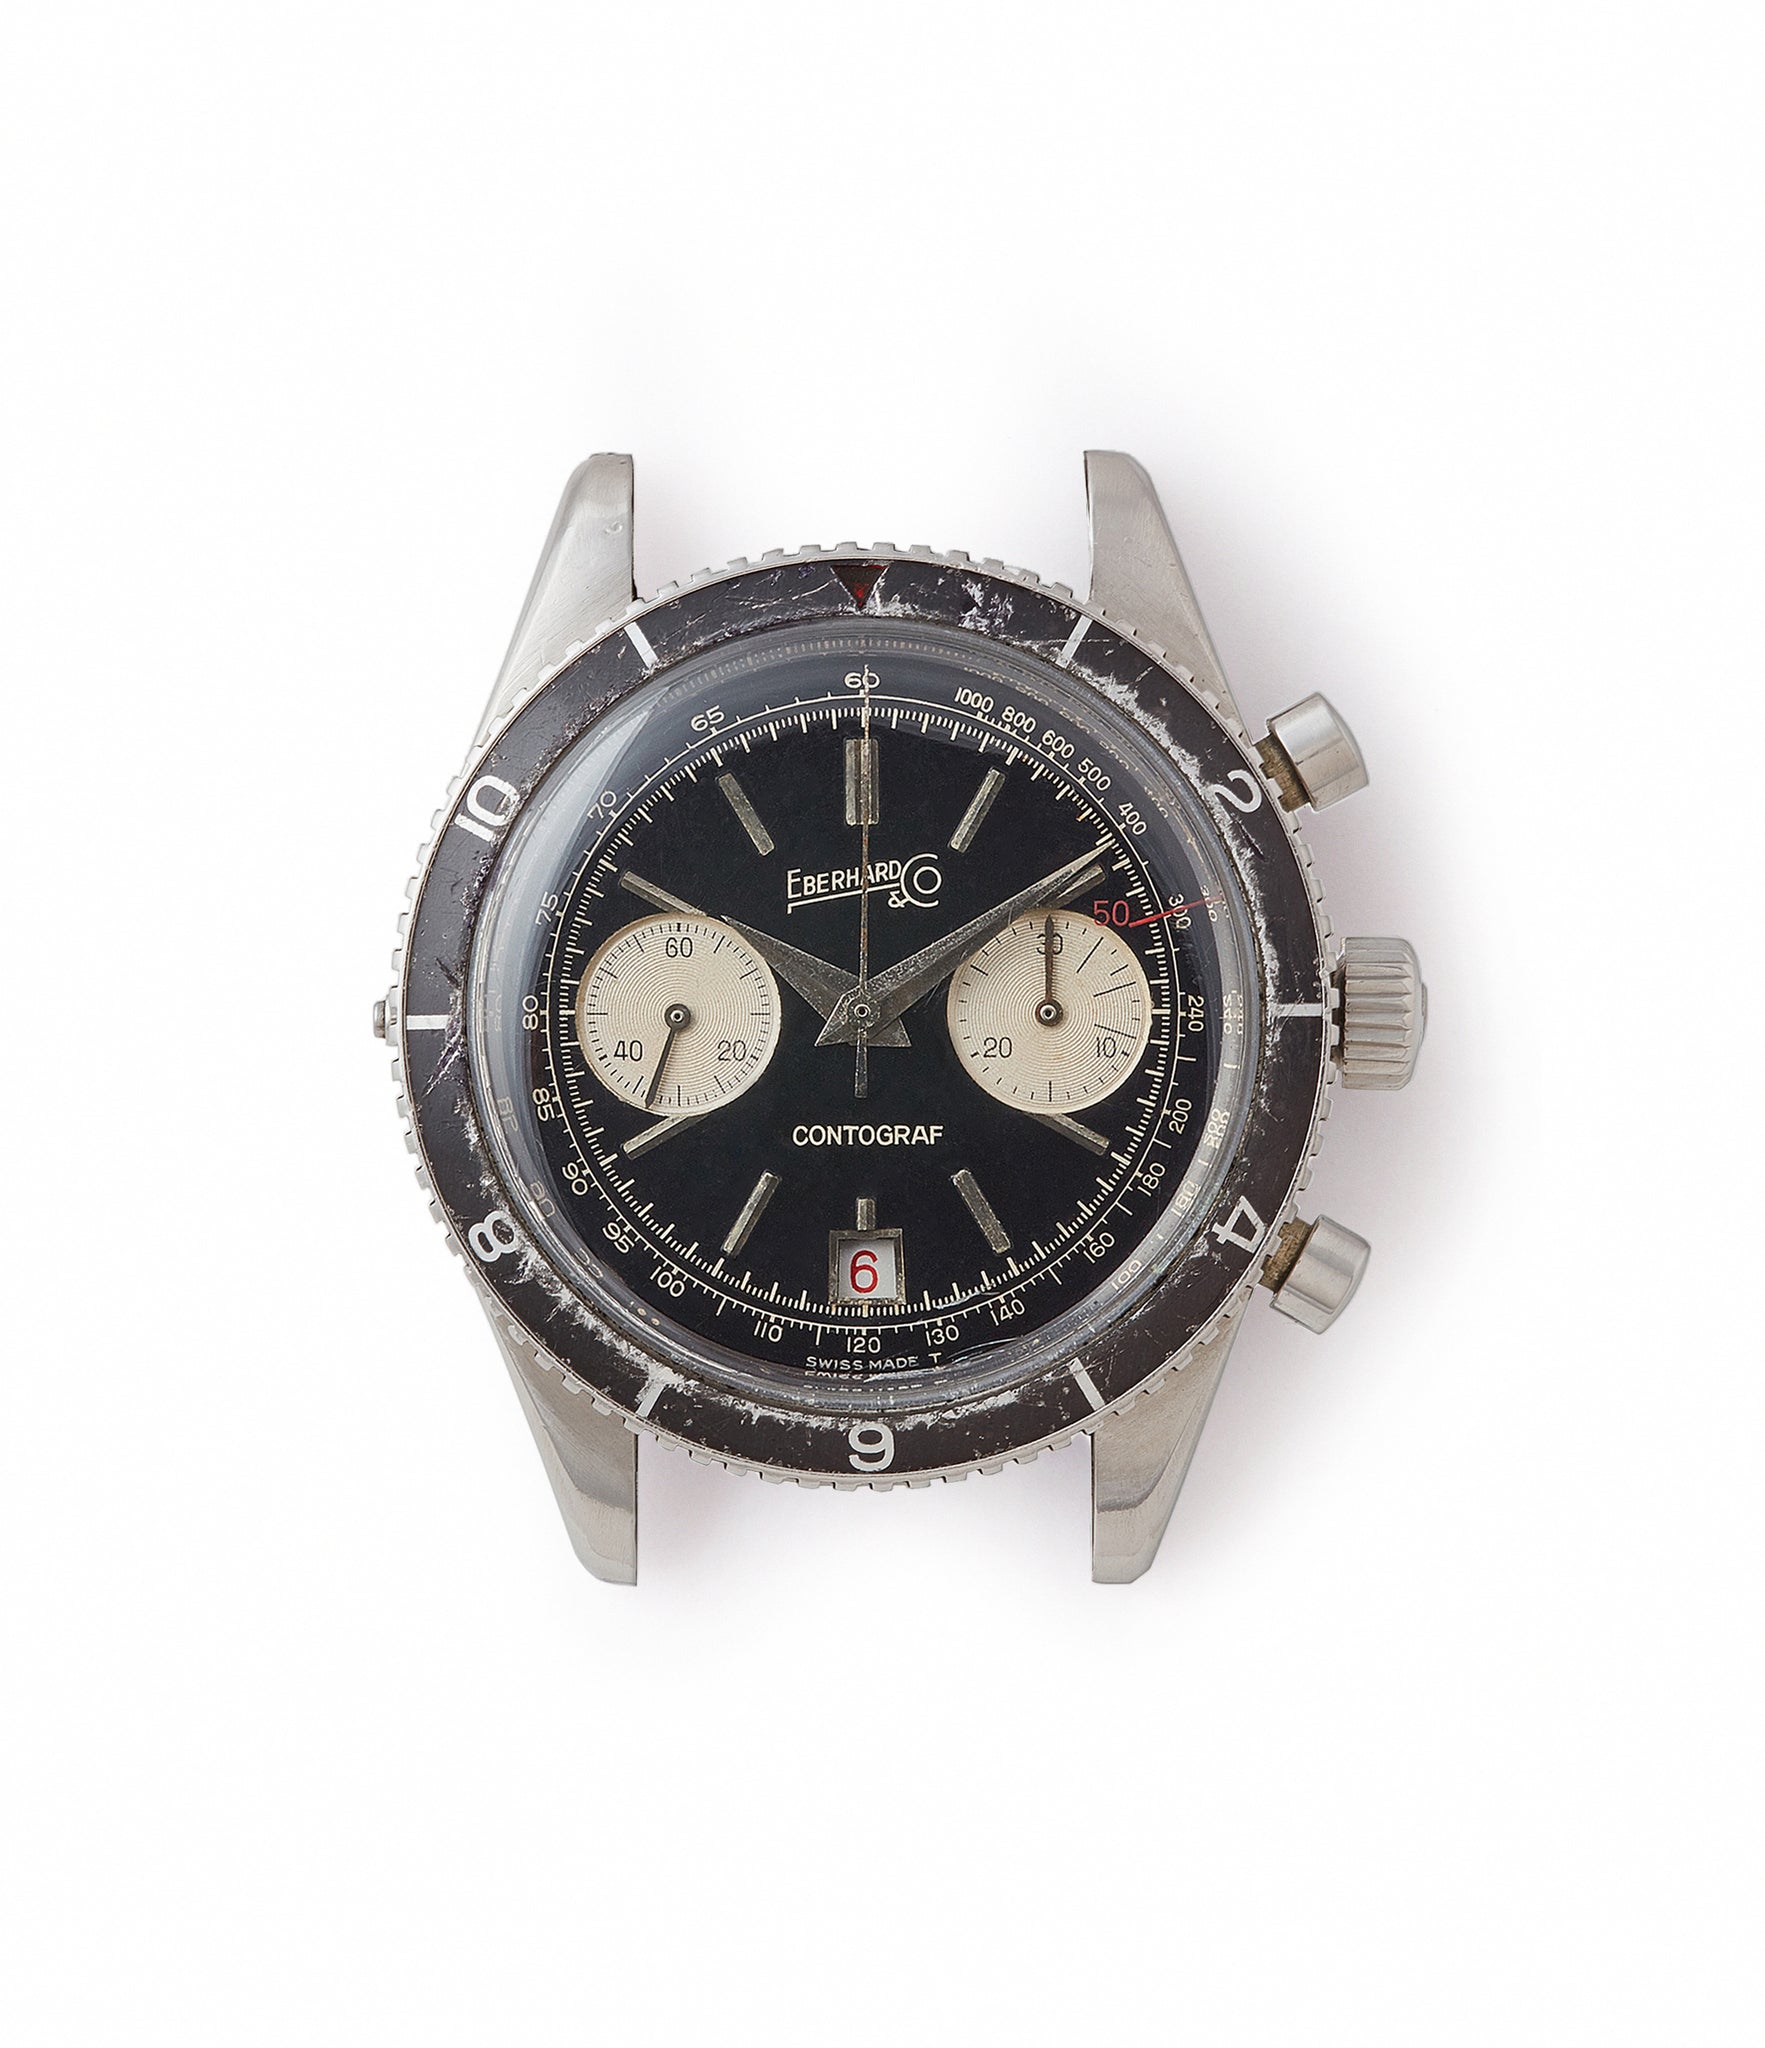 vintage sports watch Eberhard Contograf chronograph steel sports watch for sale online at A Collected Man London UK specialist of rare watches